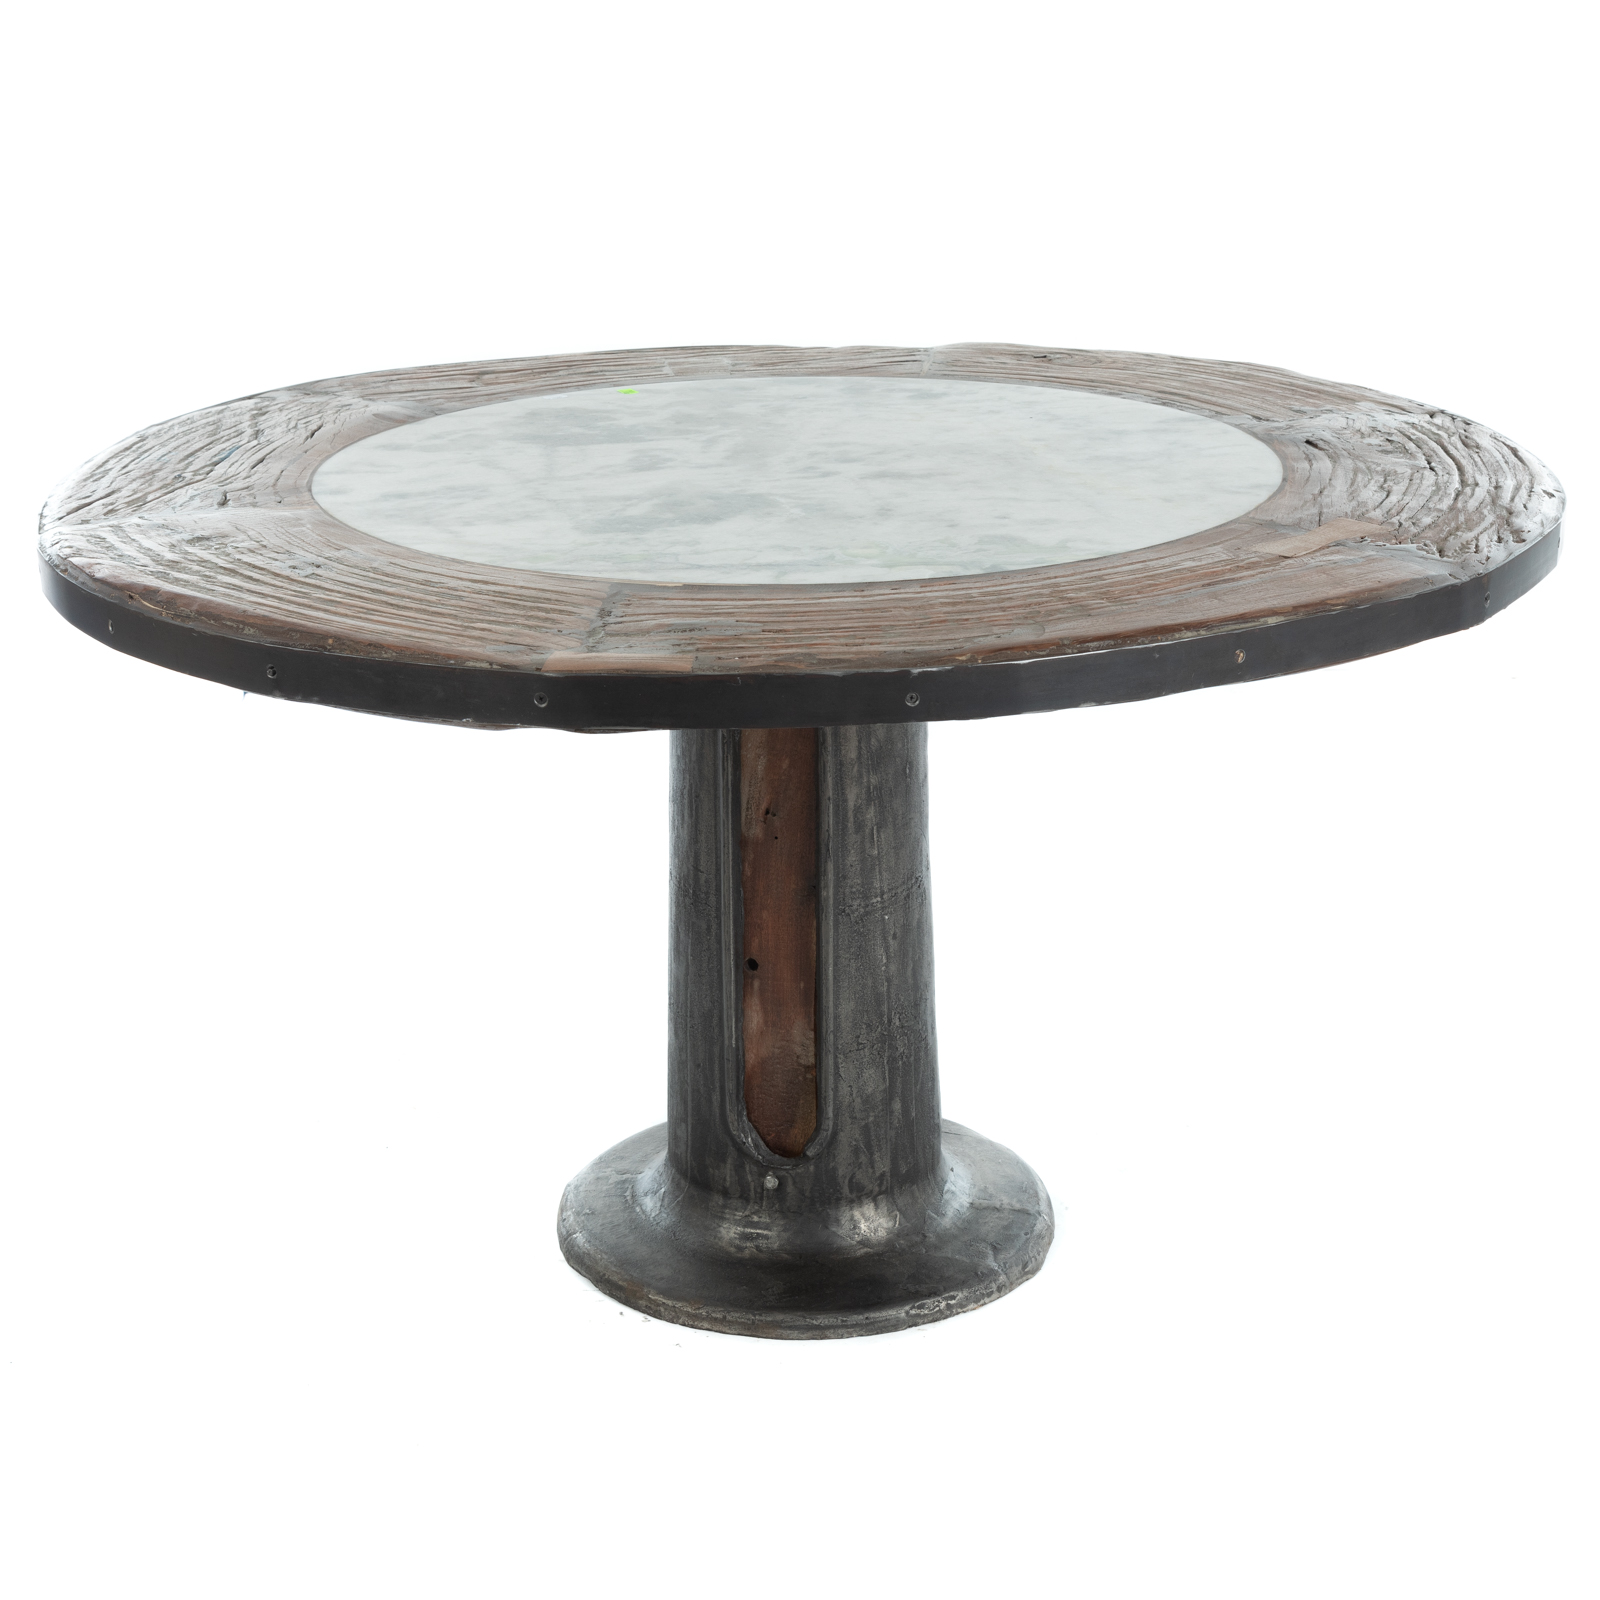 ROUND INDUSTRIAL RUSTIC DINING